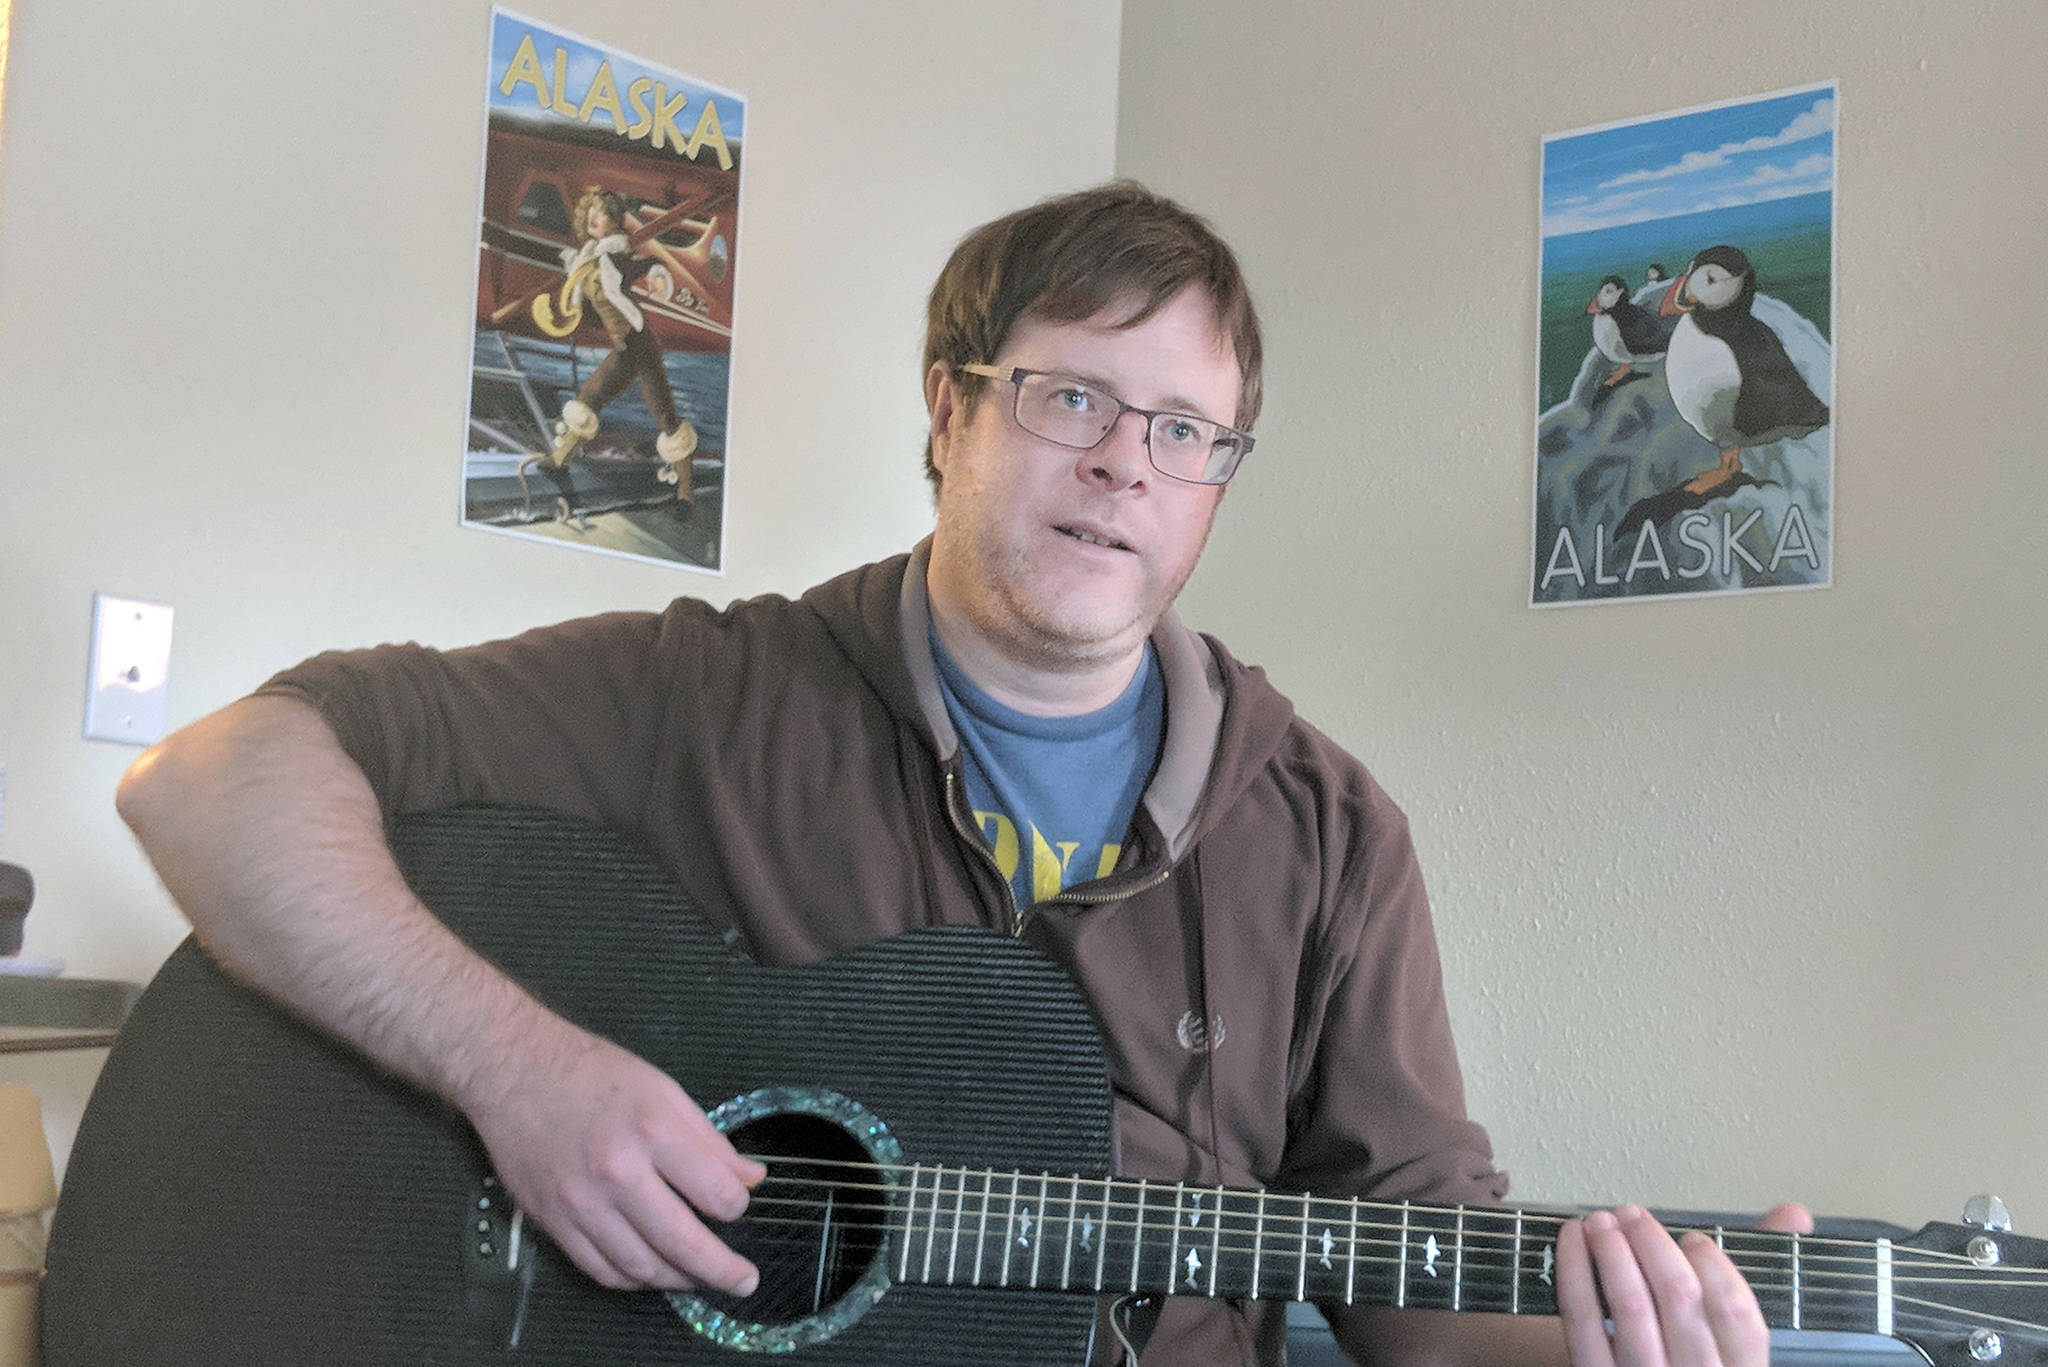 Andy Miller, a Juneau musician, released an album of 28 songs about Alaska titled, “Alaska in 28 Songs.” The project started with a goal of writing 49 songs for the 49th state, but fatigue set in, and he released the project as a a pay-what-you-want Bandcamp album. (Ben Hohenstatt | Capital City Weekly)